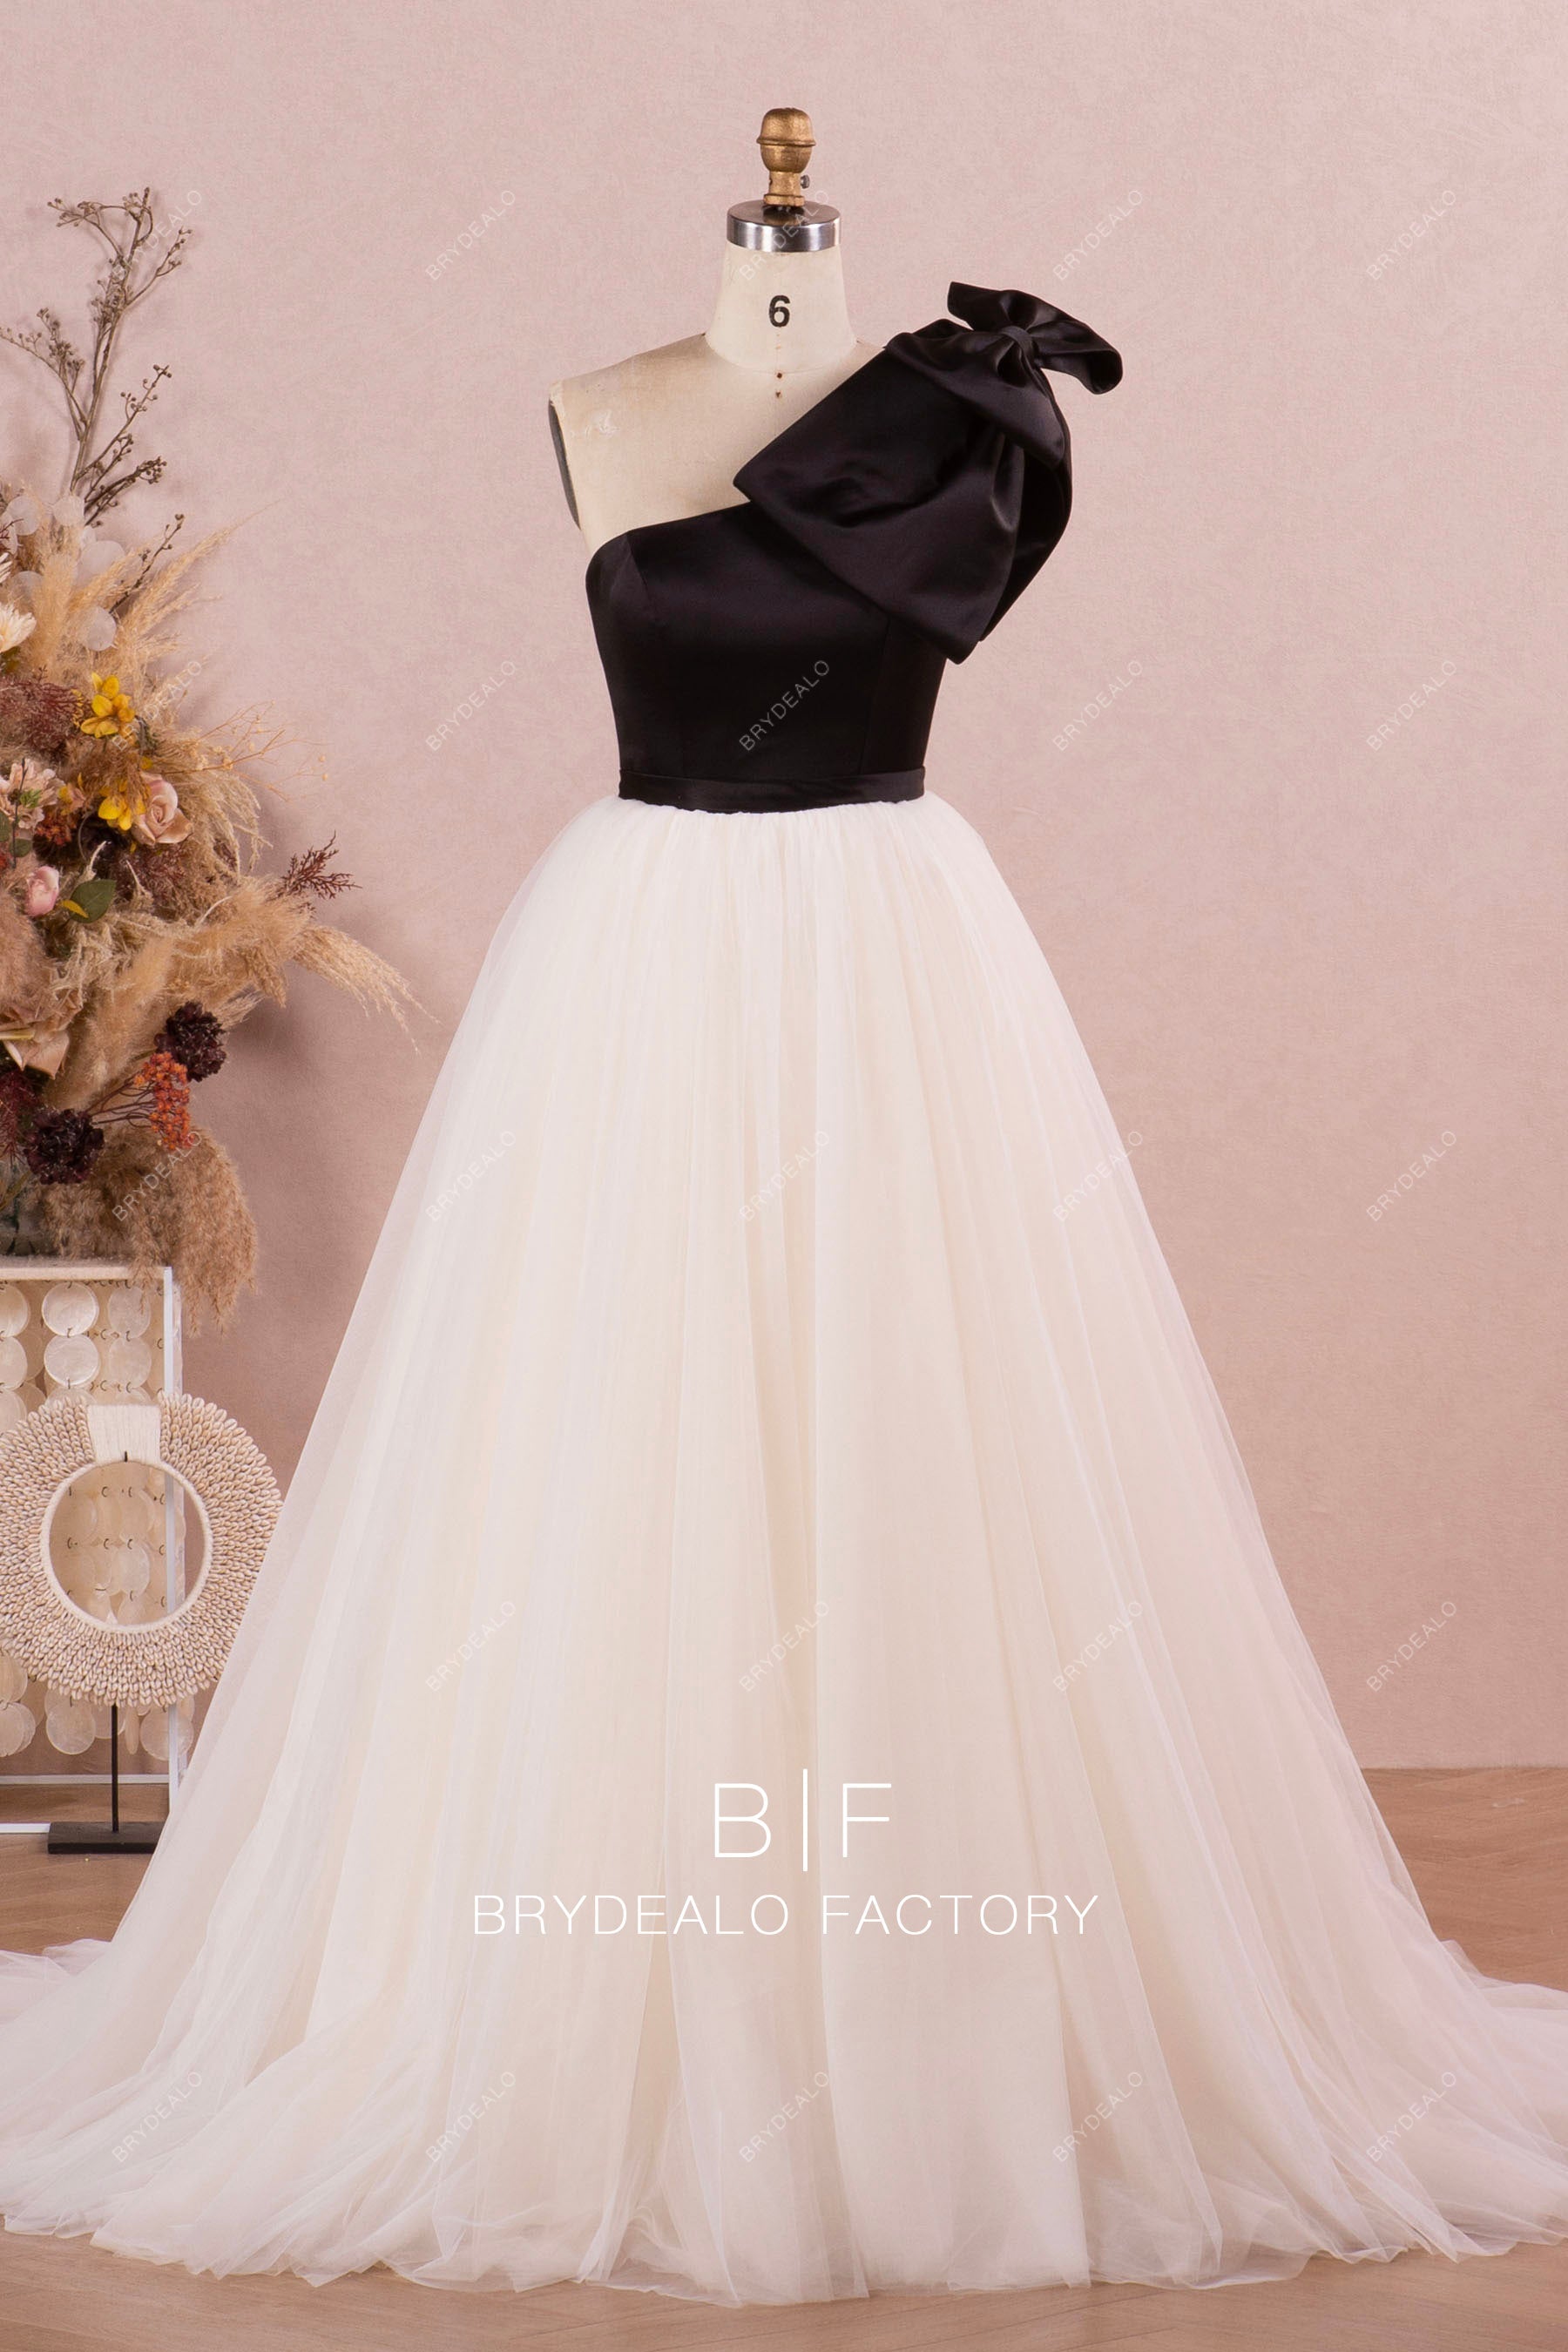 Black Satin Big Bow One-Shoulder Ivory Tulle Ball Gown Wedding Dress